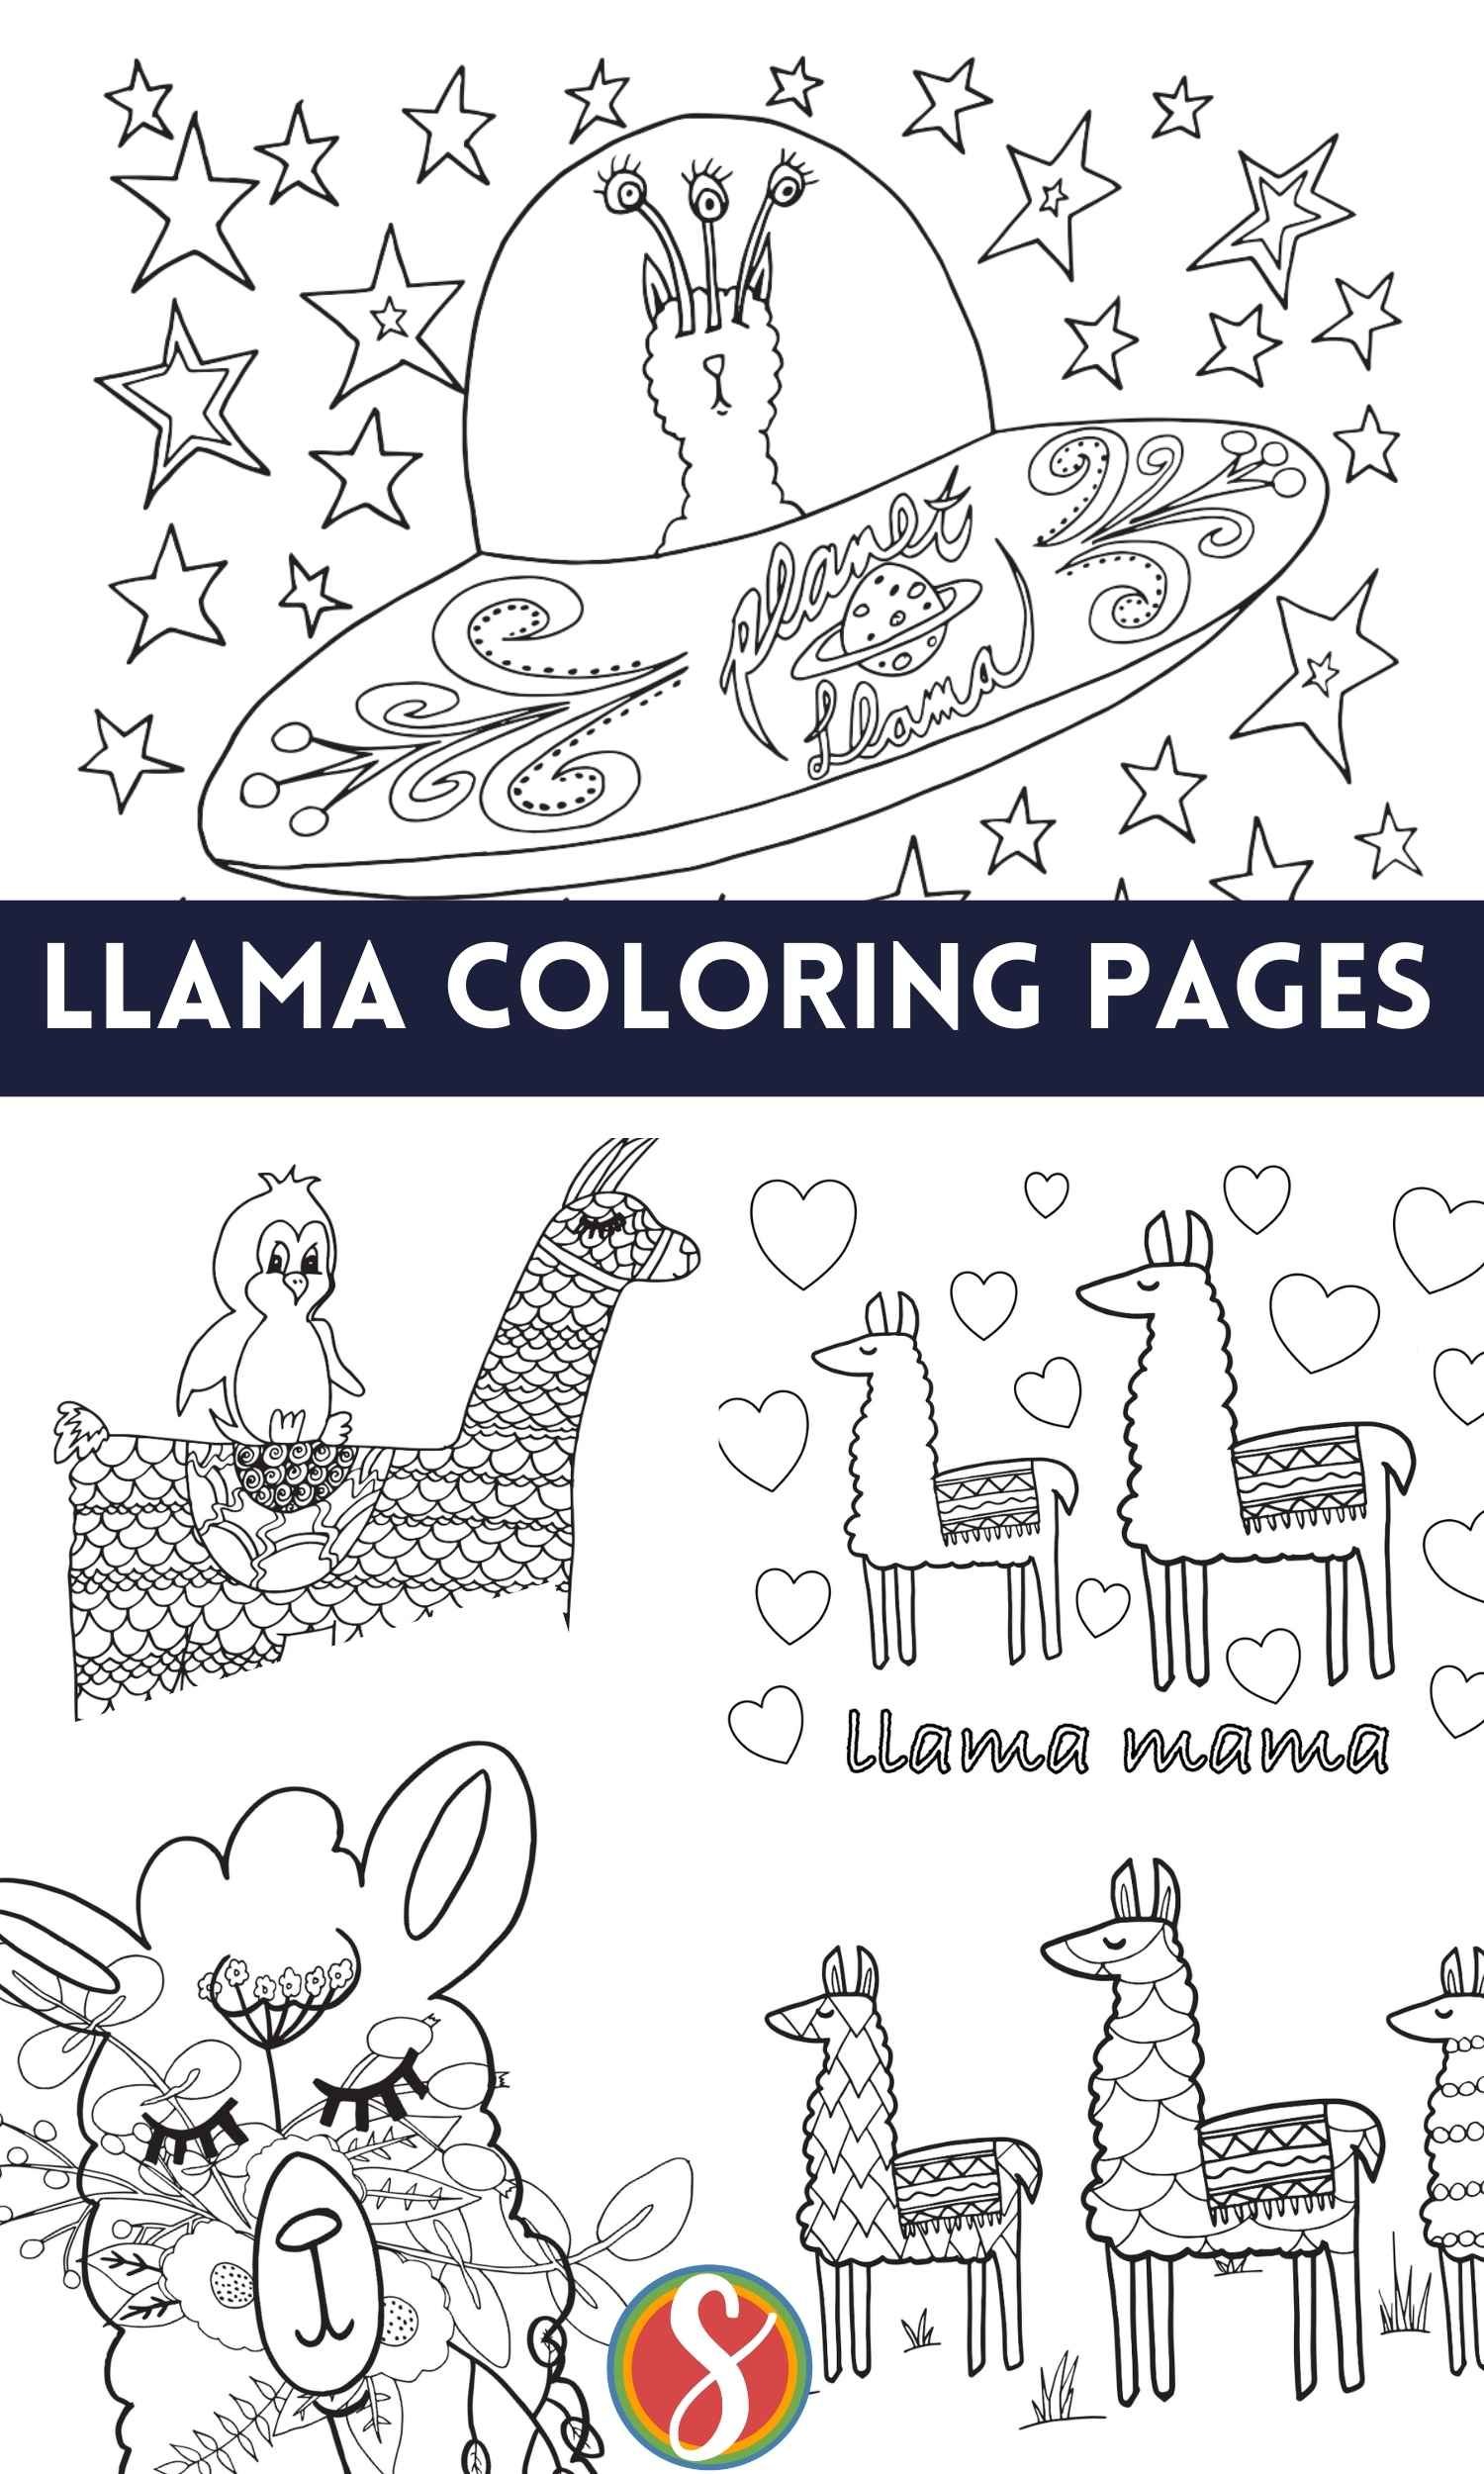 a collage of llama coloring pages